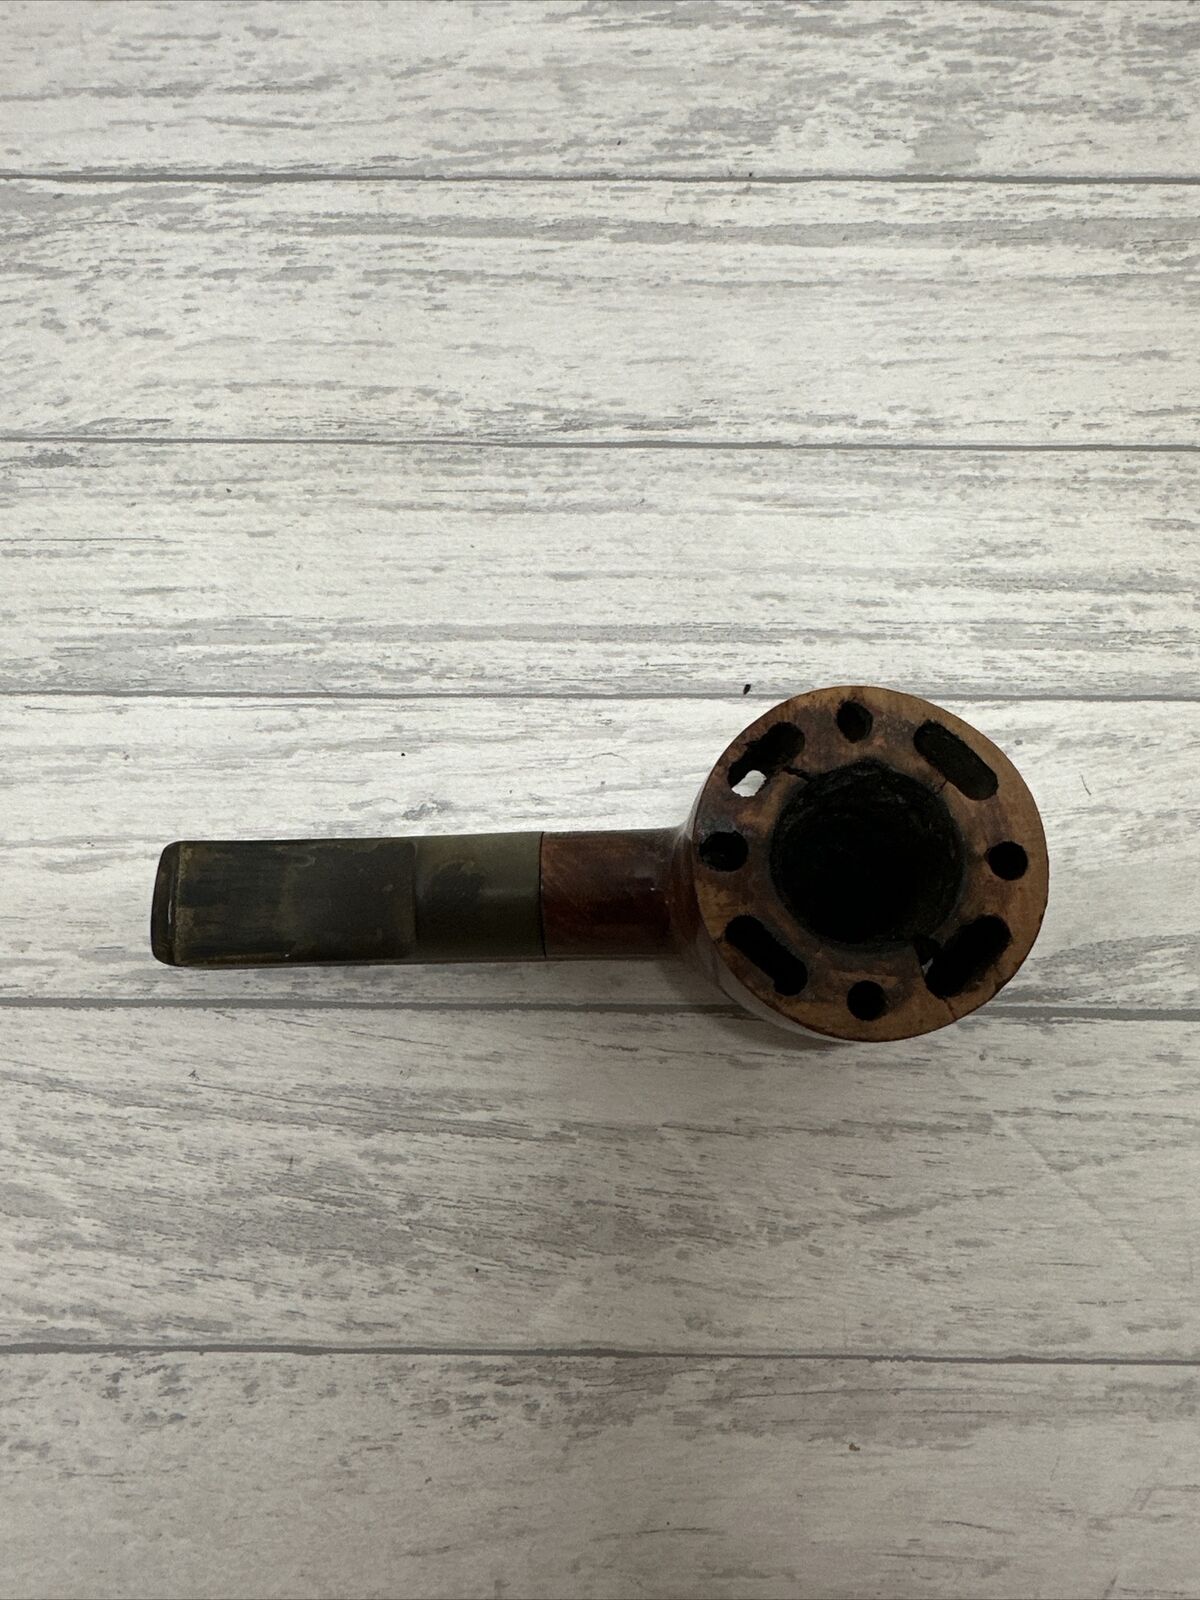 Judd's Nice Vintage Century Old Radiator Pipe Collector Antique Wooden